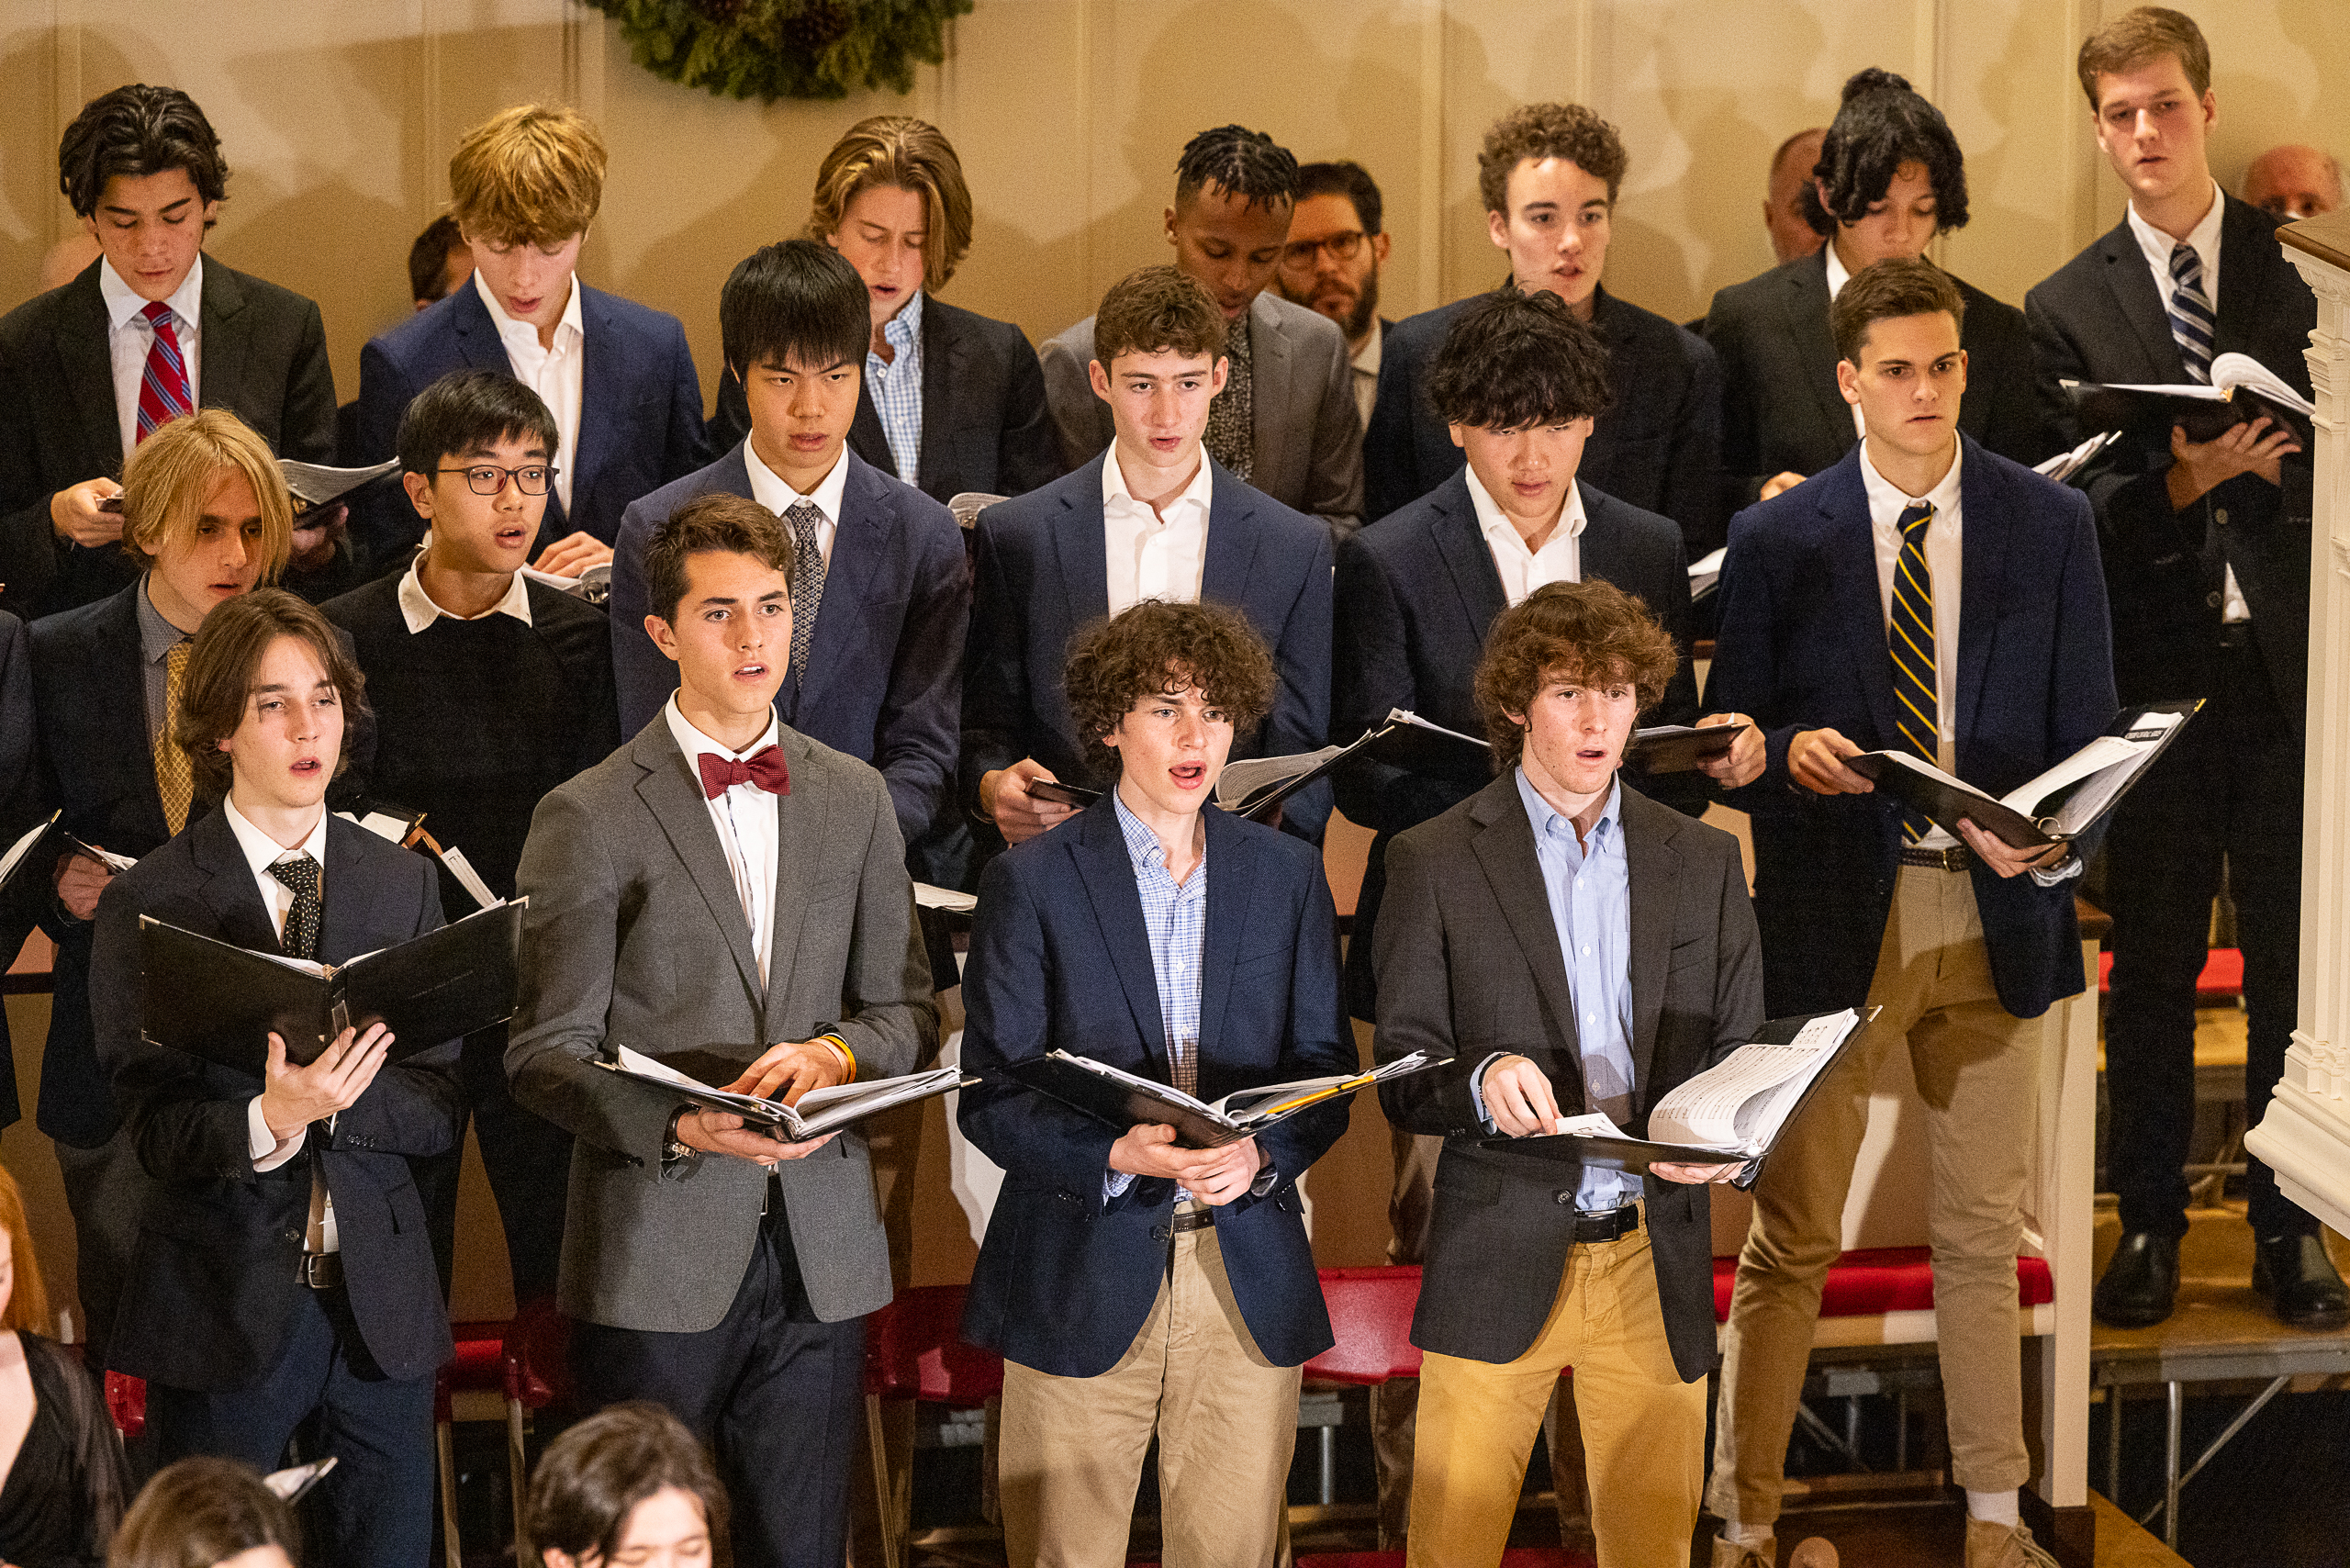 Middlesex School – Holiday Concert 2022